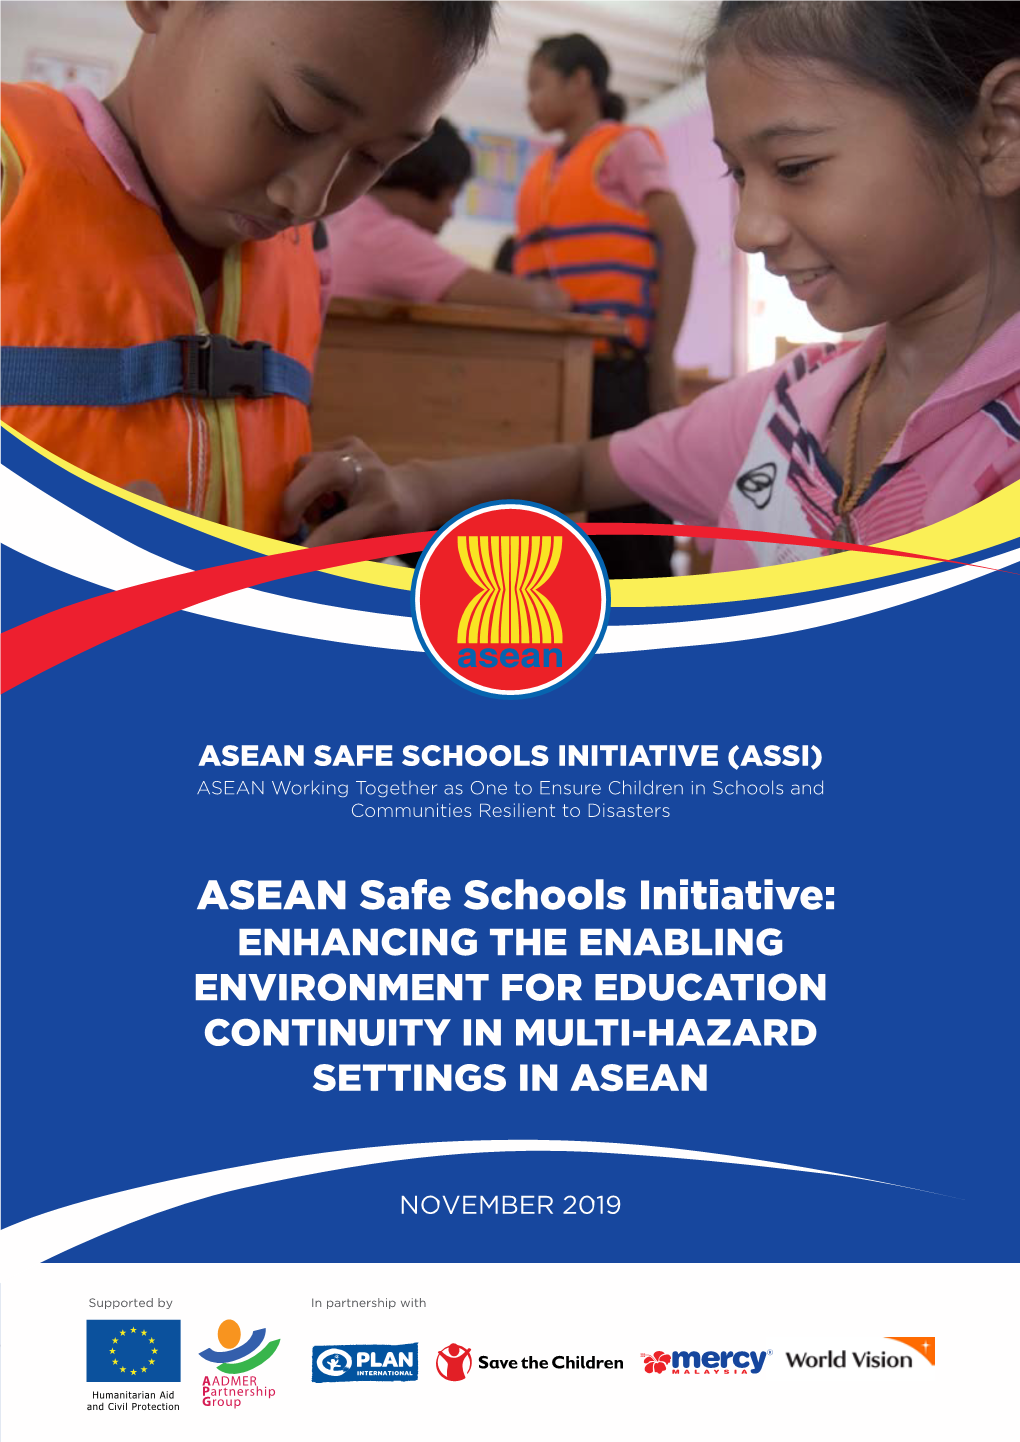 ASEAN SAFE SCHOOLS INITIATIVE (ASSI) ASEAN Working Together As One to Ensure Children in Schools and Communities Resilient to Disasters